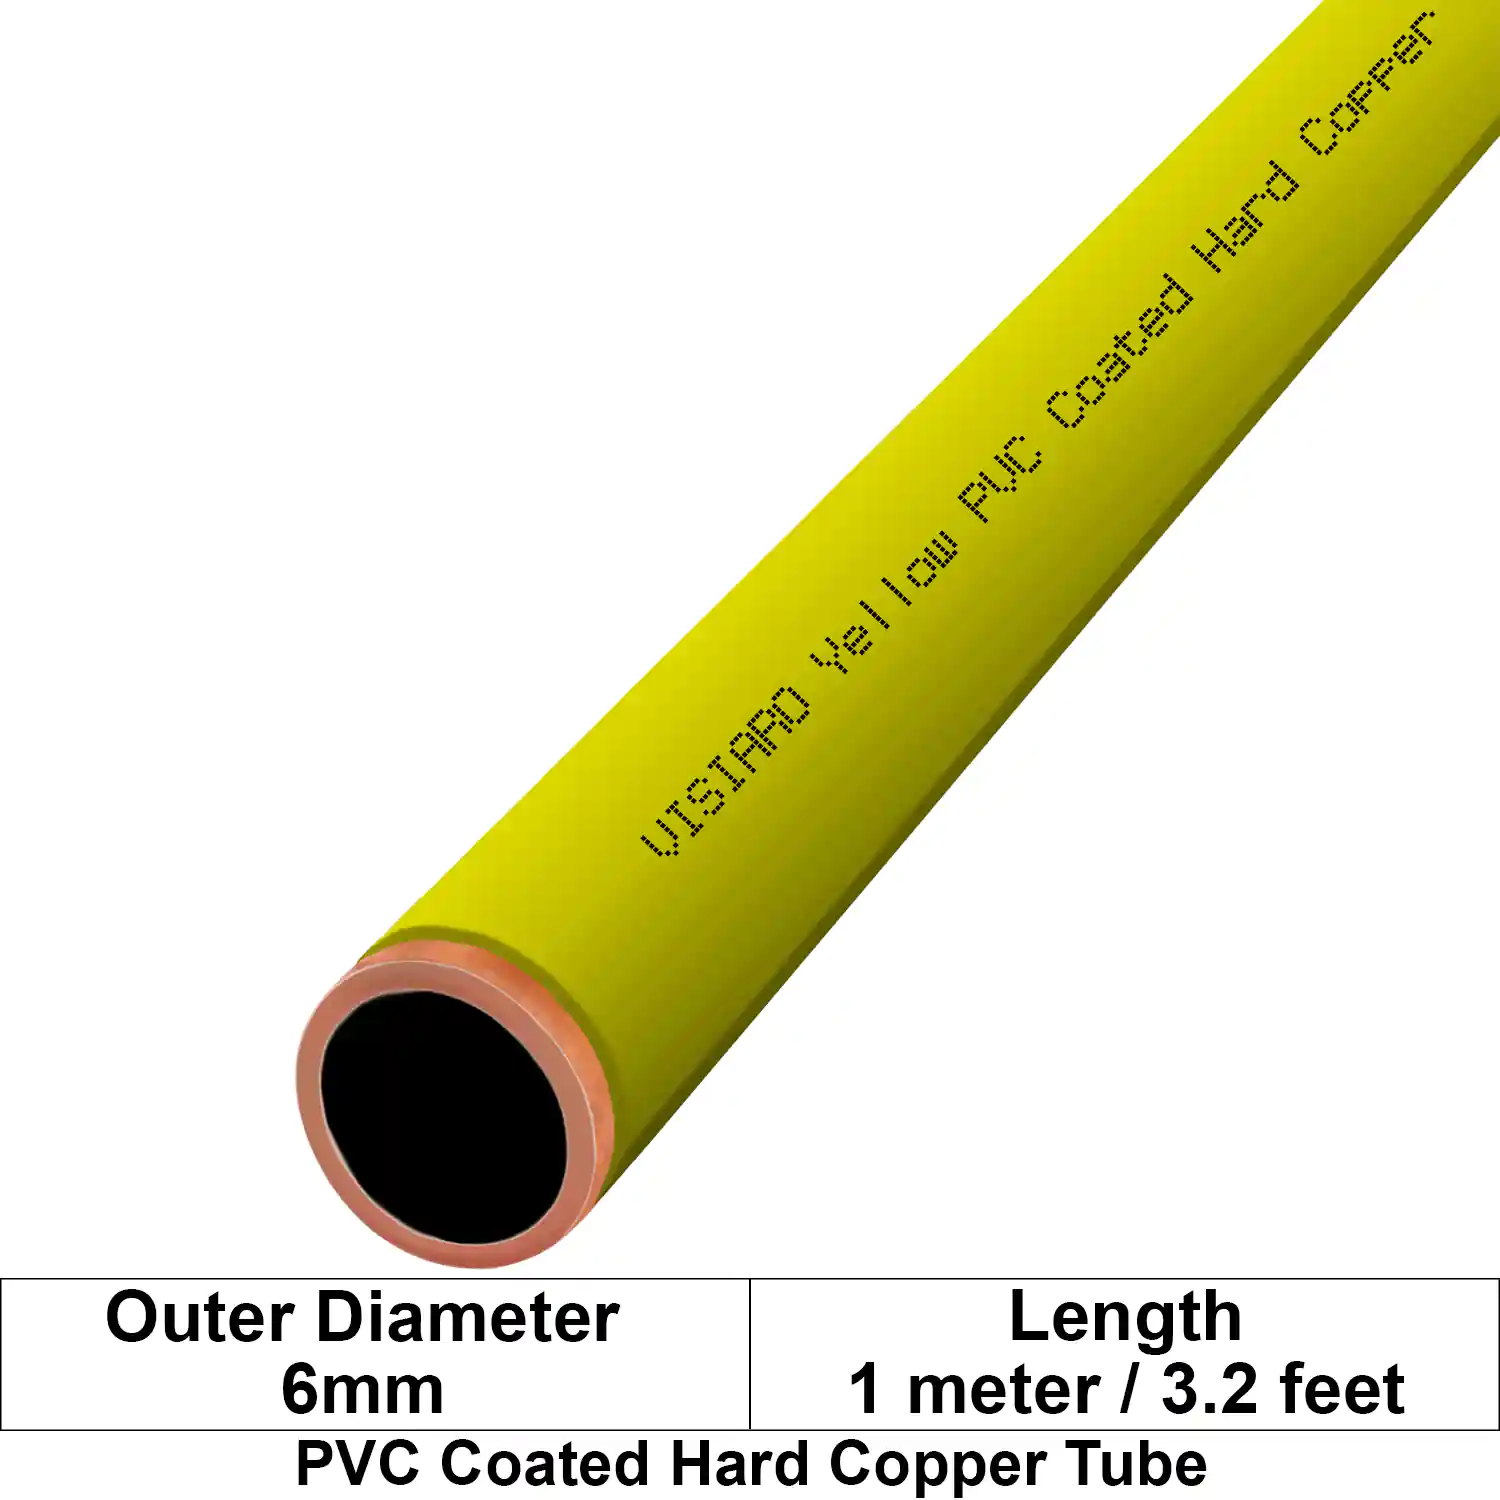 Visiaro Yellow PVC Coated Hard Copper Tube 1mtr long Outer Diameter - 6 mm